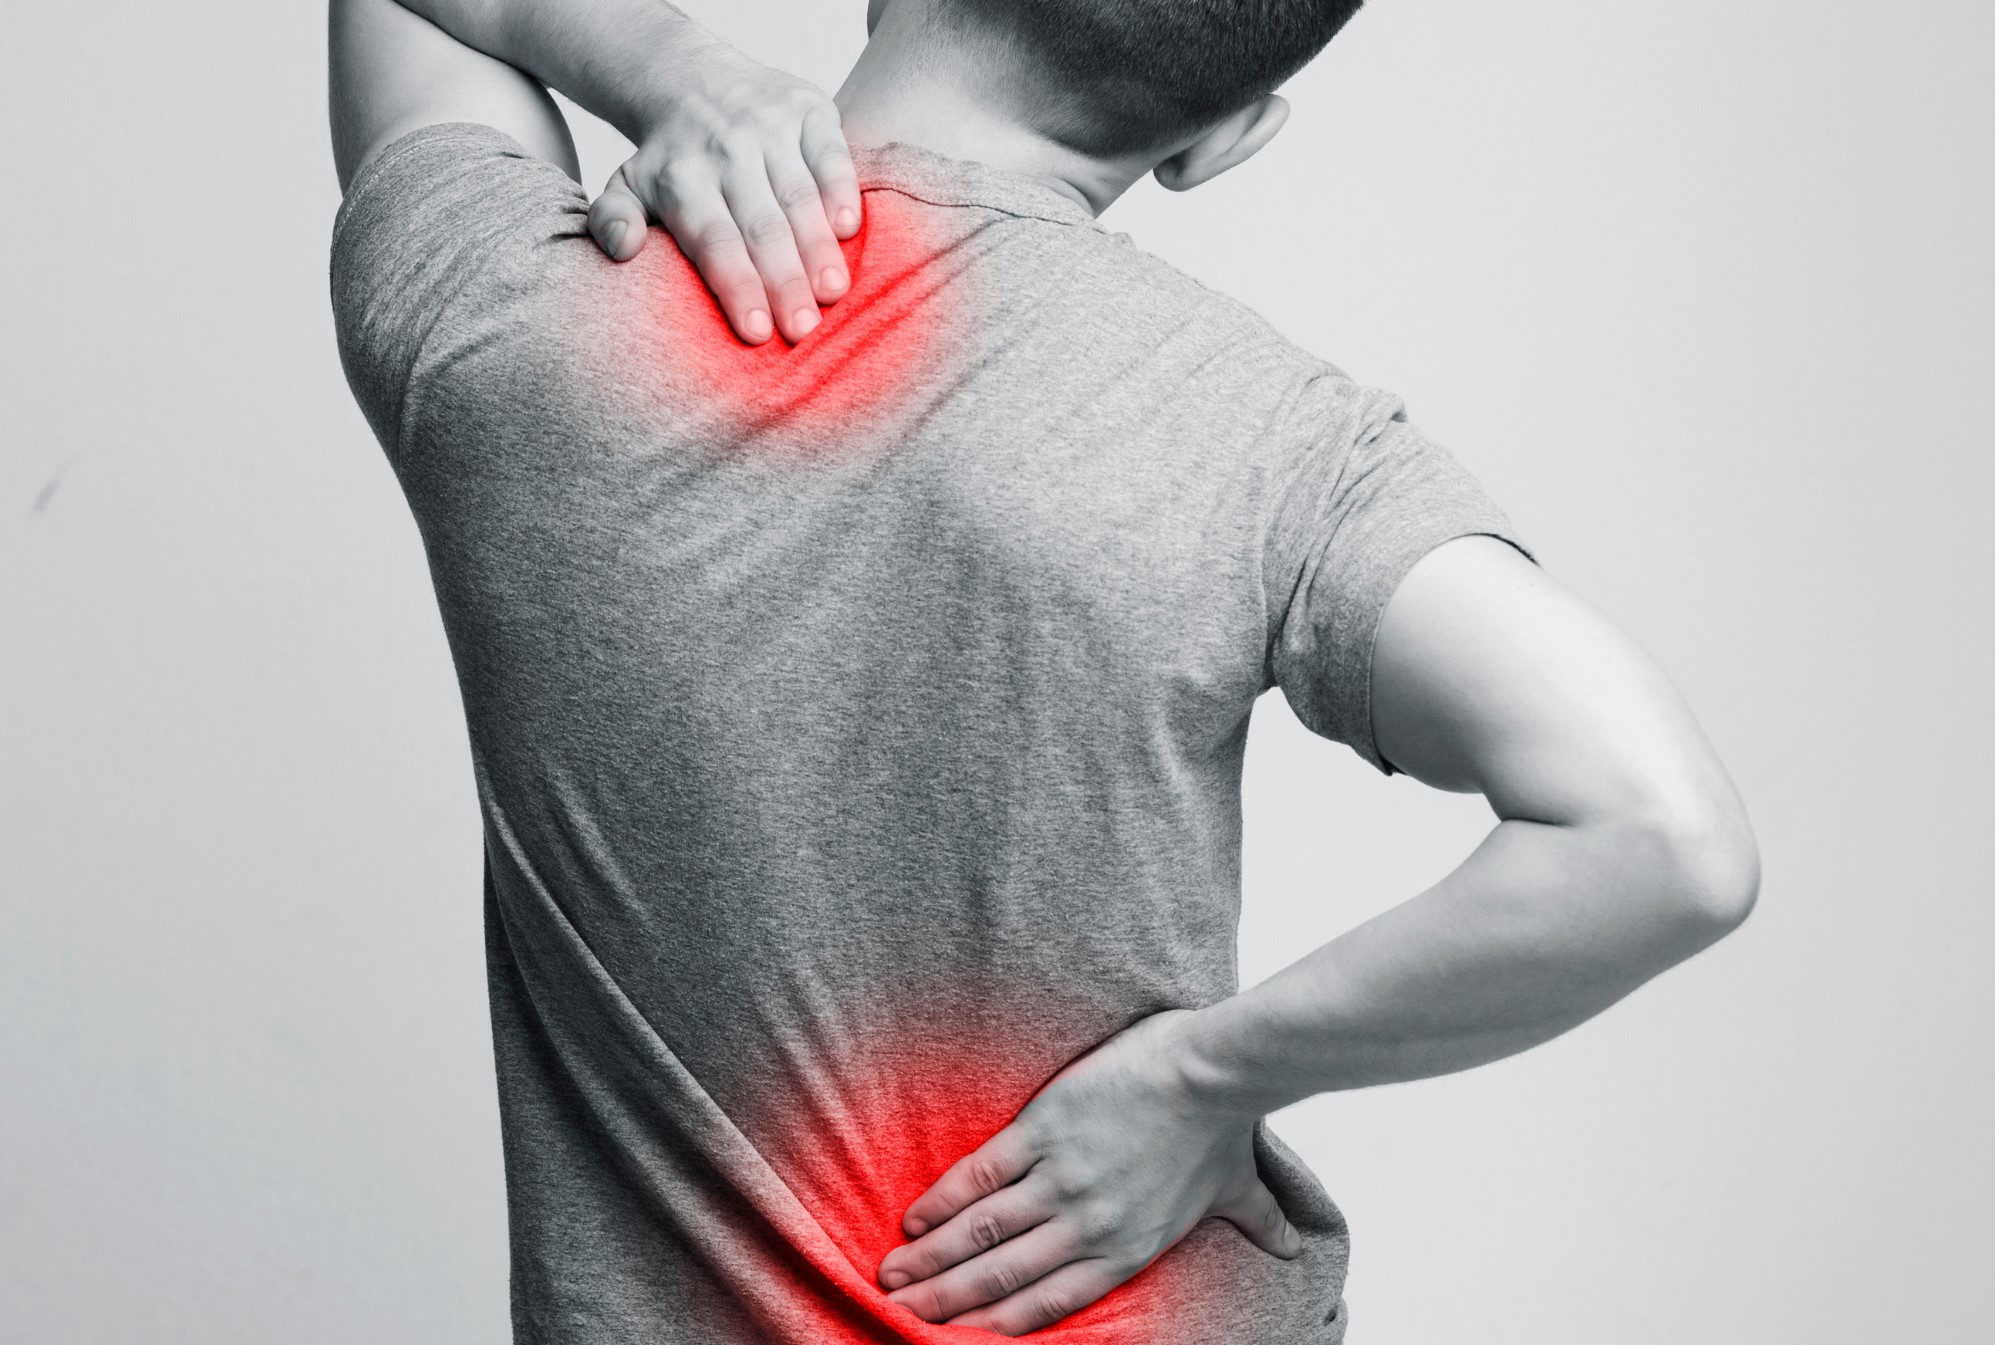 Three Ways to Repair Your Back Problems Naturally and Upgrade Your Lifestyle at The Same Time